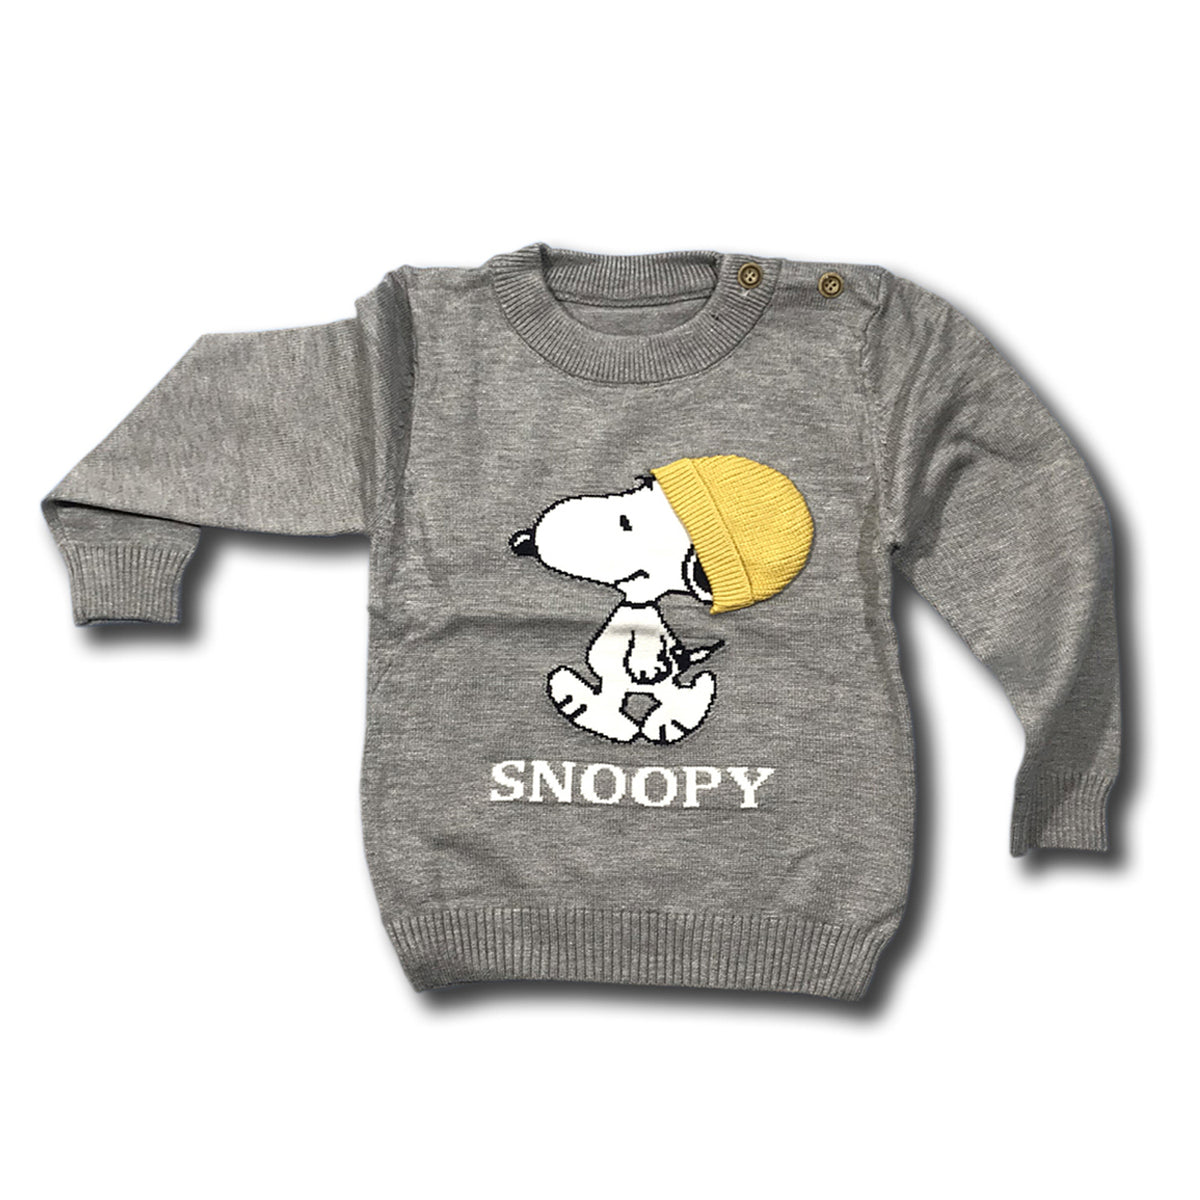 Moms Home Organic Cotton Unisex Baby Winter Sweaters Grey Snoopy